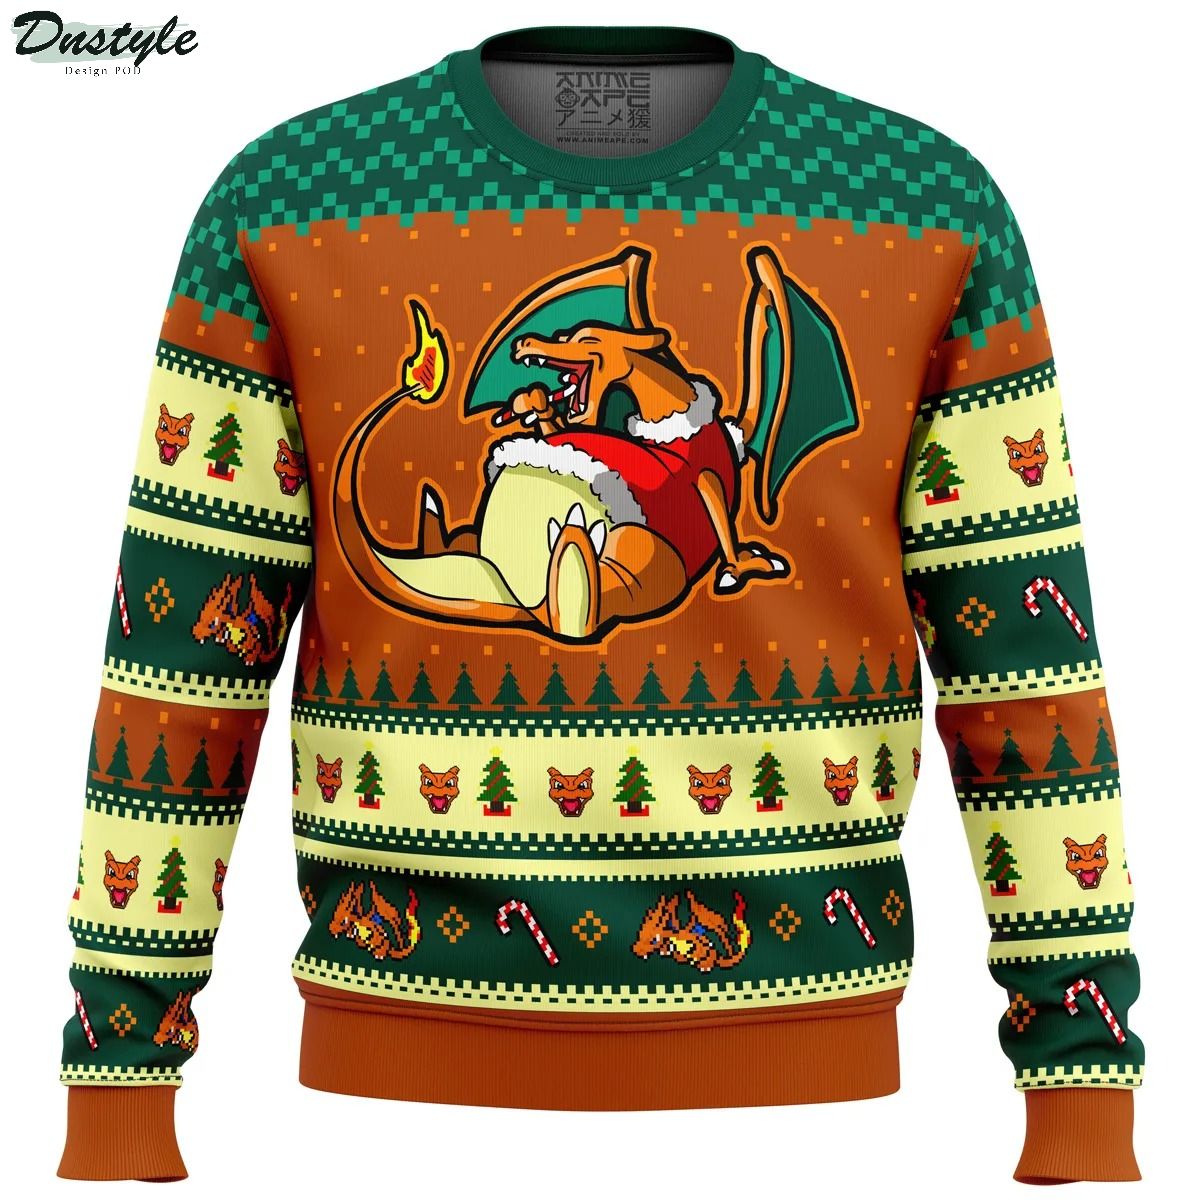 Pokemon Eating Candy Cane Charizard Ugly Christmas Sweater